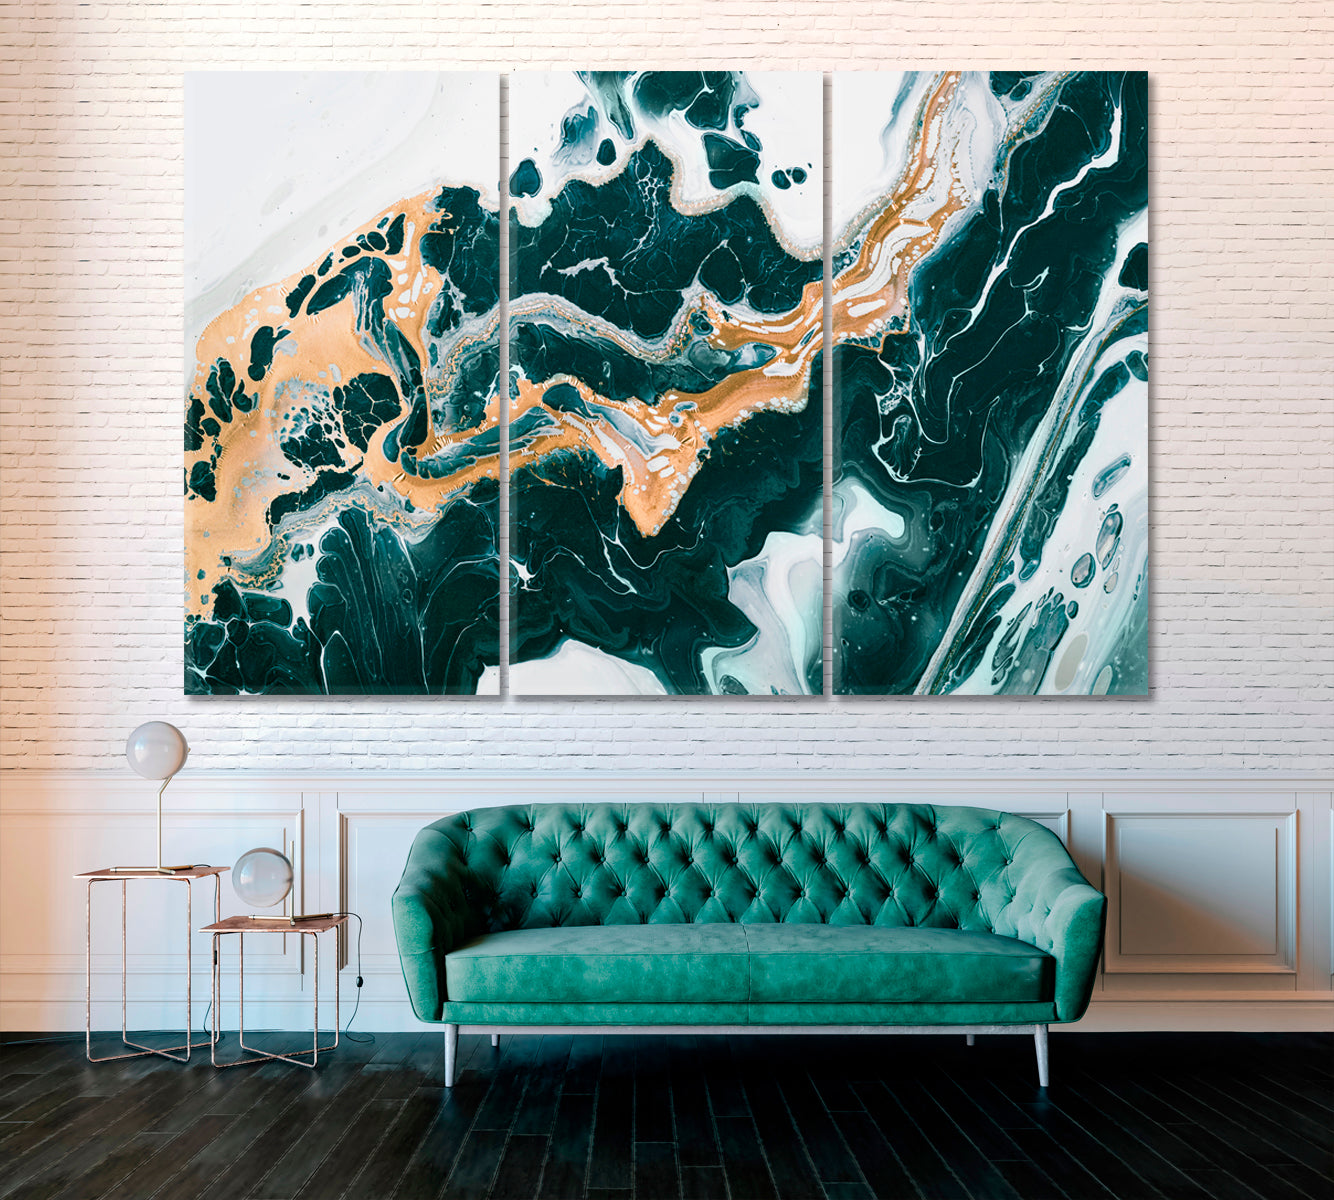 Liquid Green Abstract Wavy Marble Canvas Print ArtLexy 3 Panels 36"x24" inches 